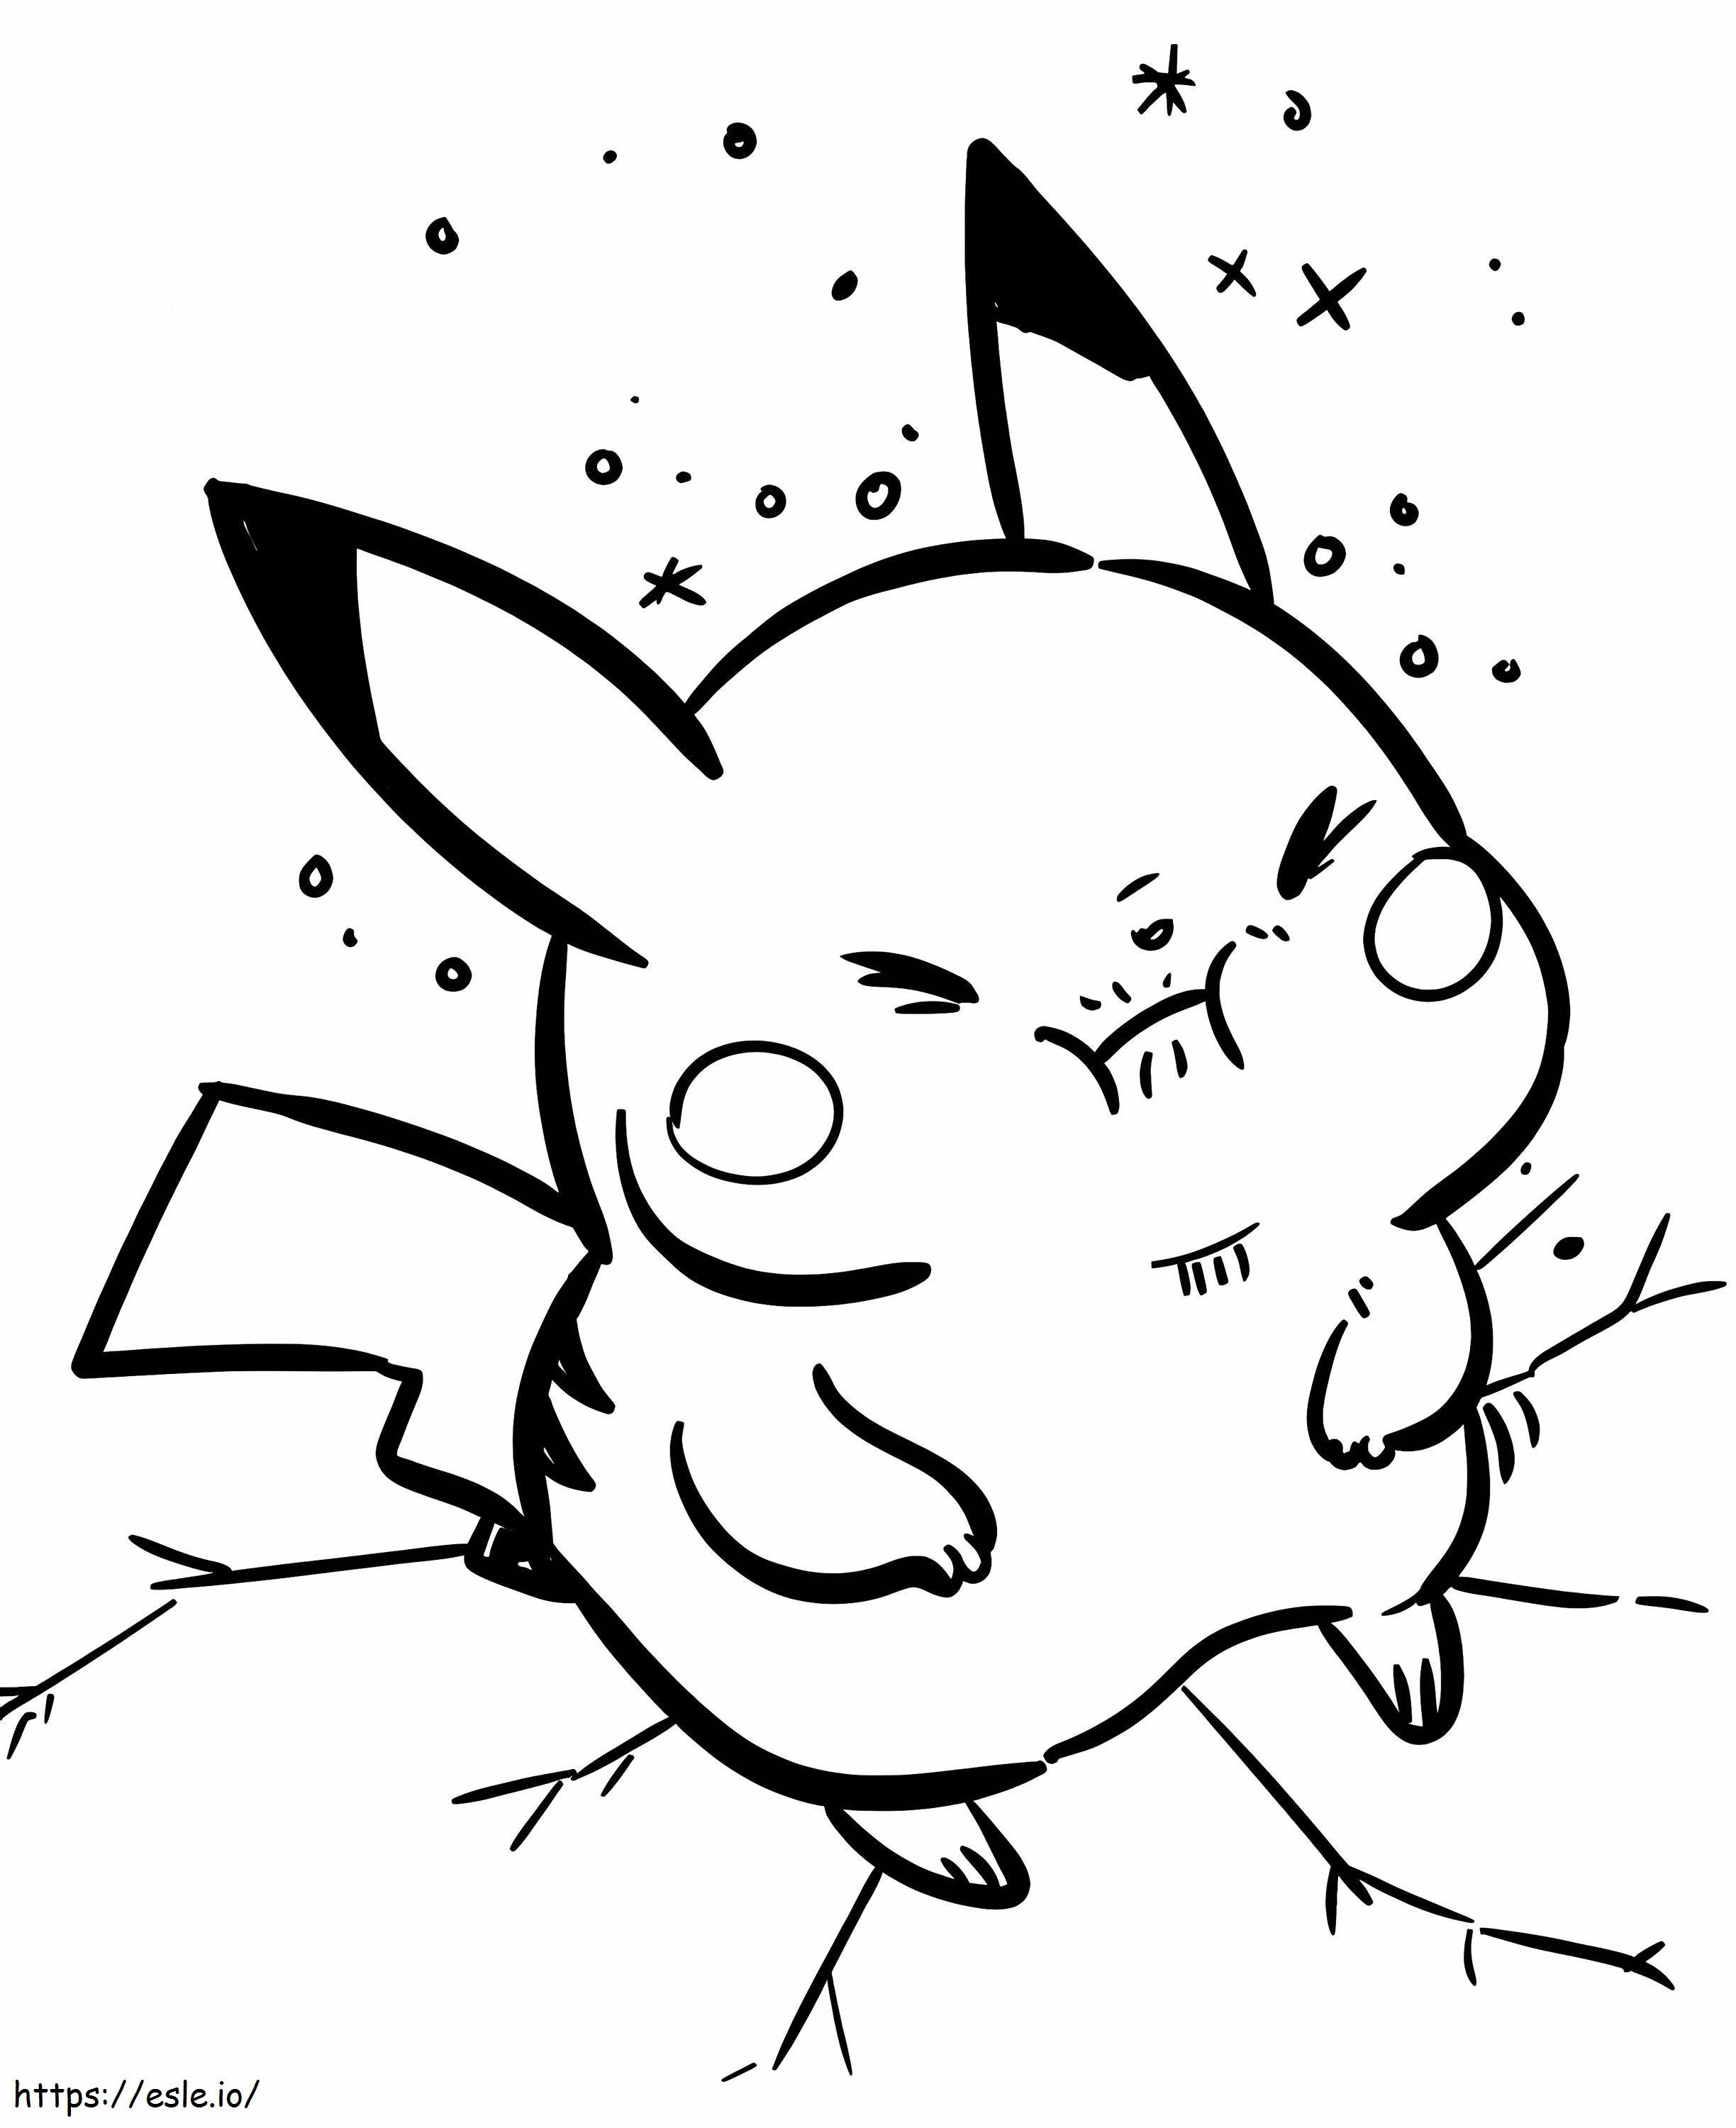 Pikachu Looks Funny coloring page